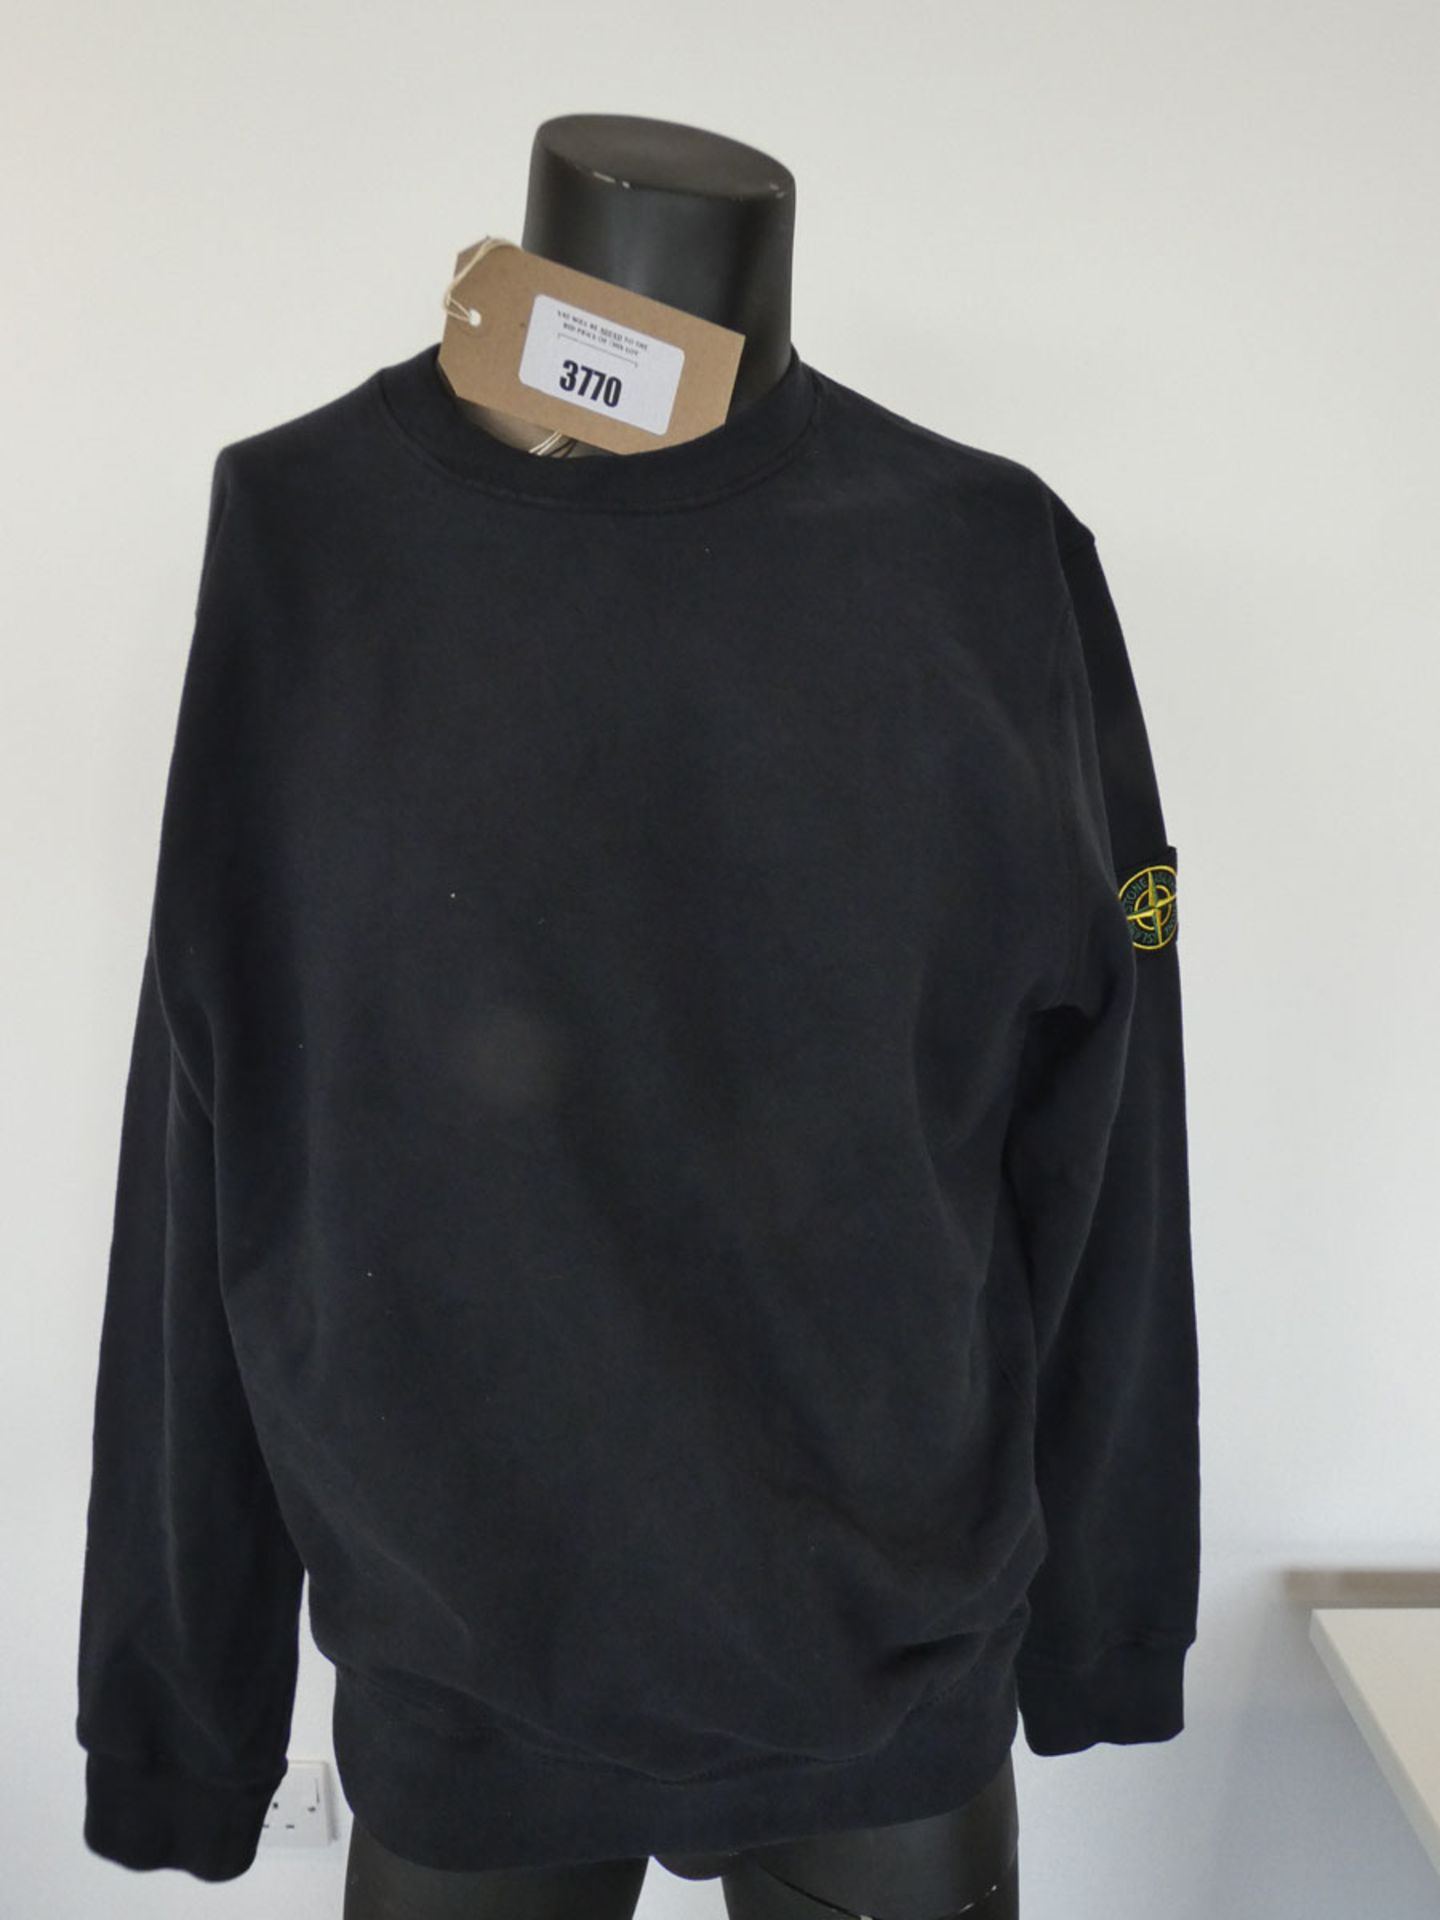 Stone Island men's navy sweater size XL (Mannequin not included)